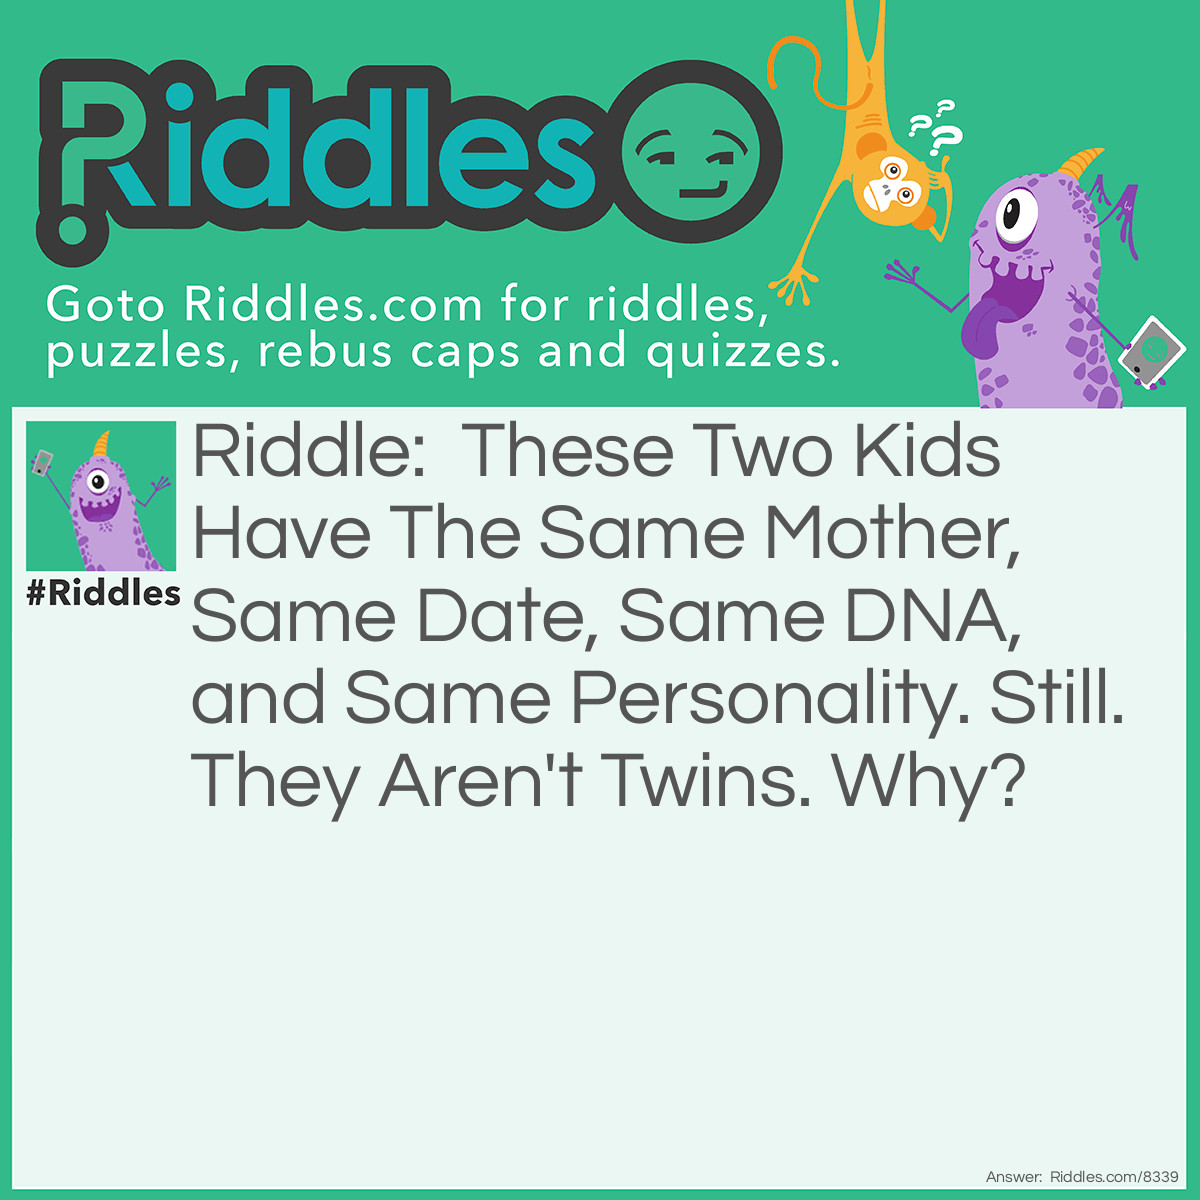 Riddle: These Two Kids Have The Same Mother, Same Date, Same DNA, and Same Personality. Still. They Aren't Twins. Why? Answer: The Mother Have Triplets.